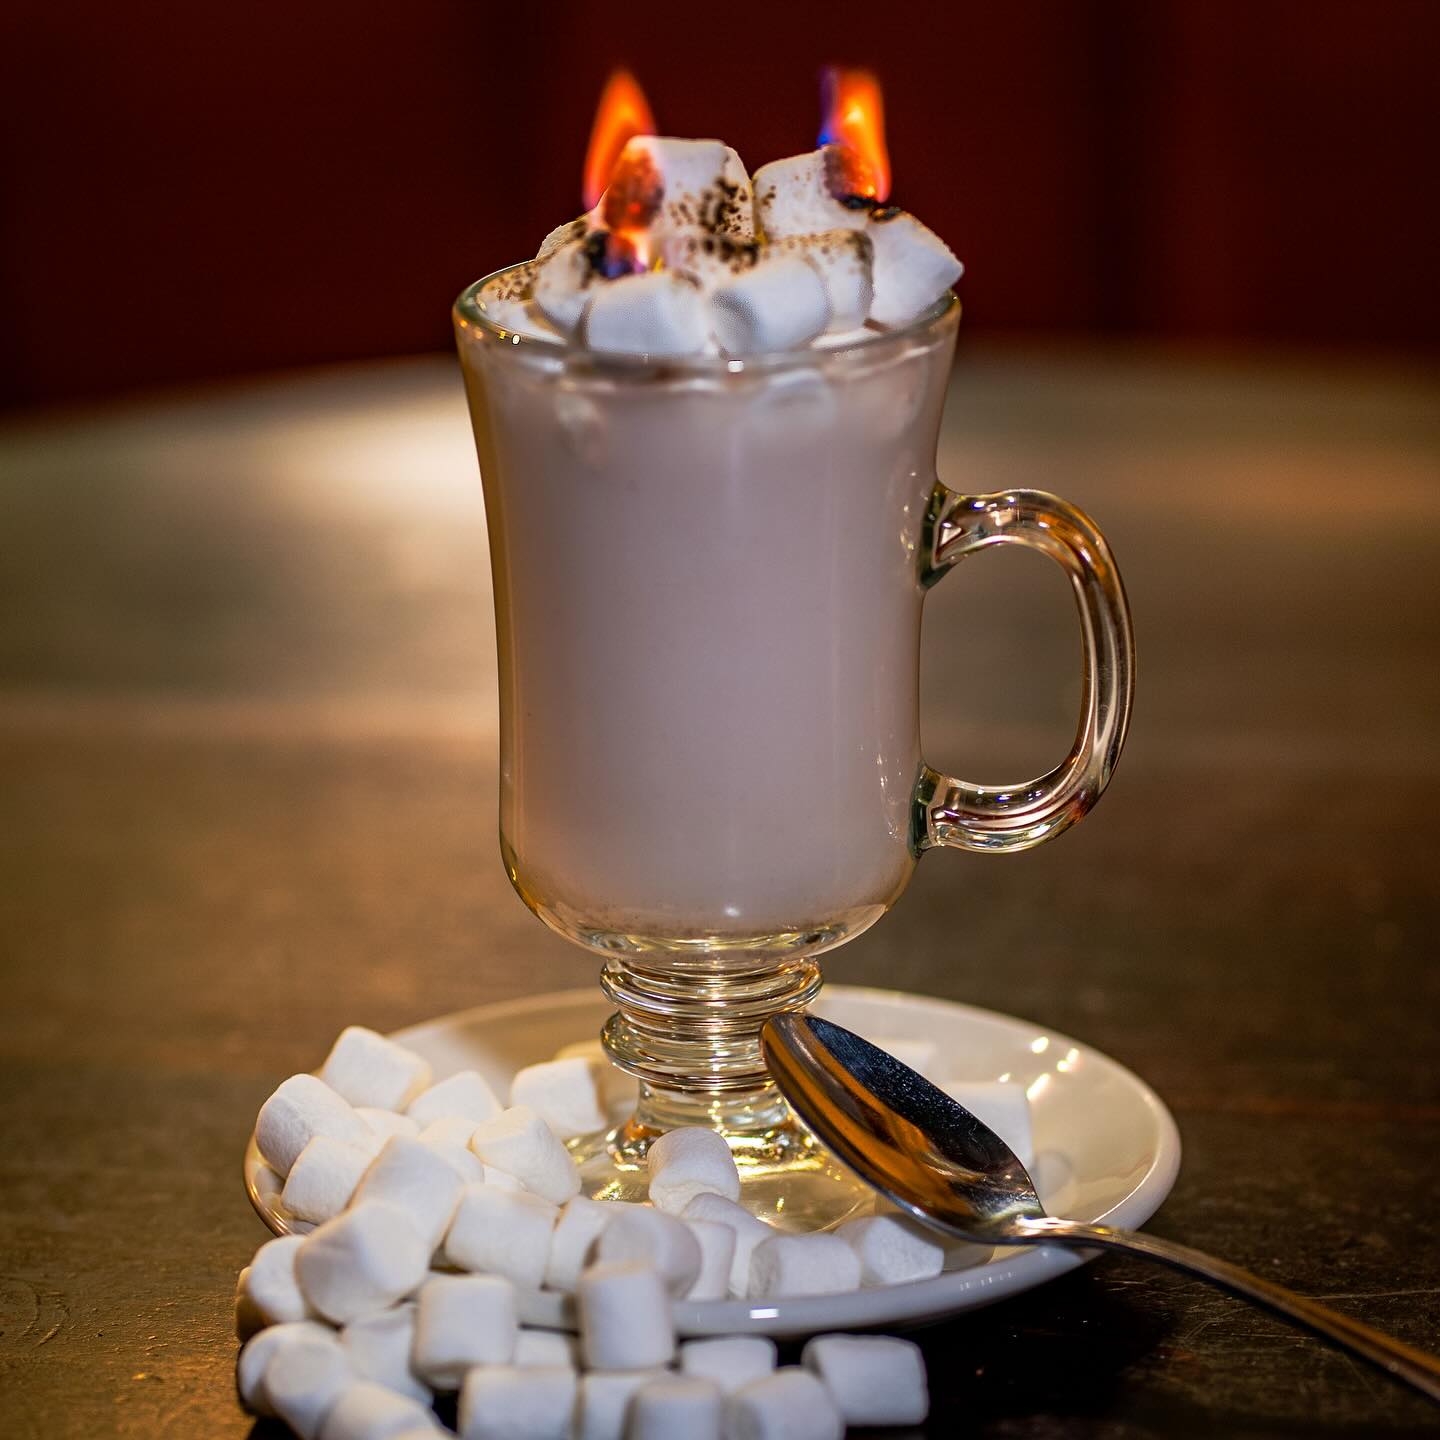 Photo of a cup of hot chocolate with marshmallows on fire on the top.